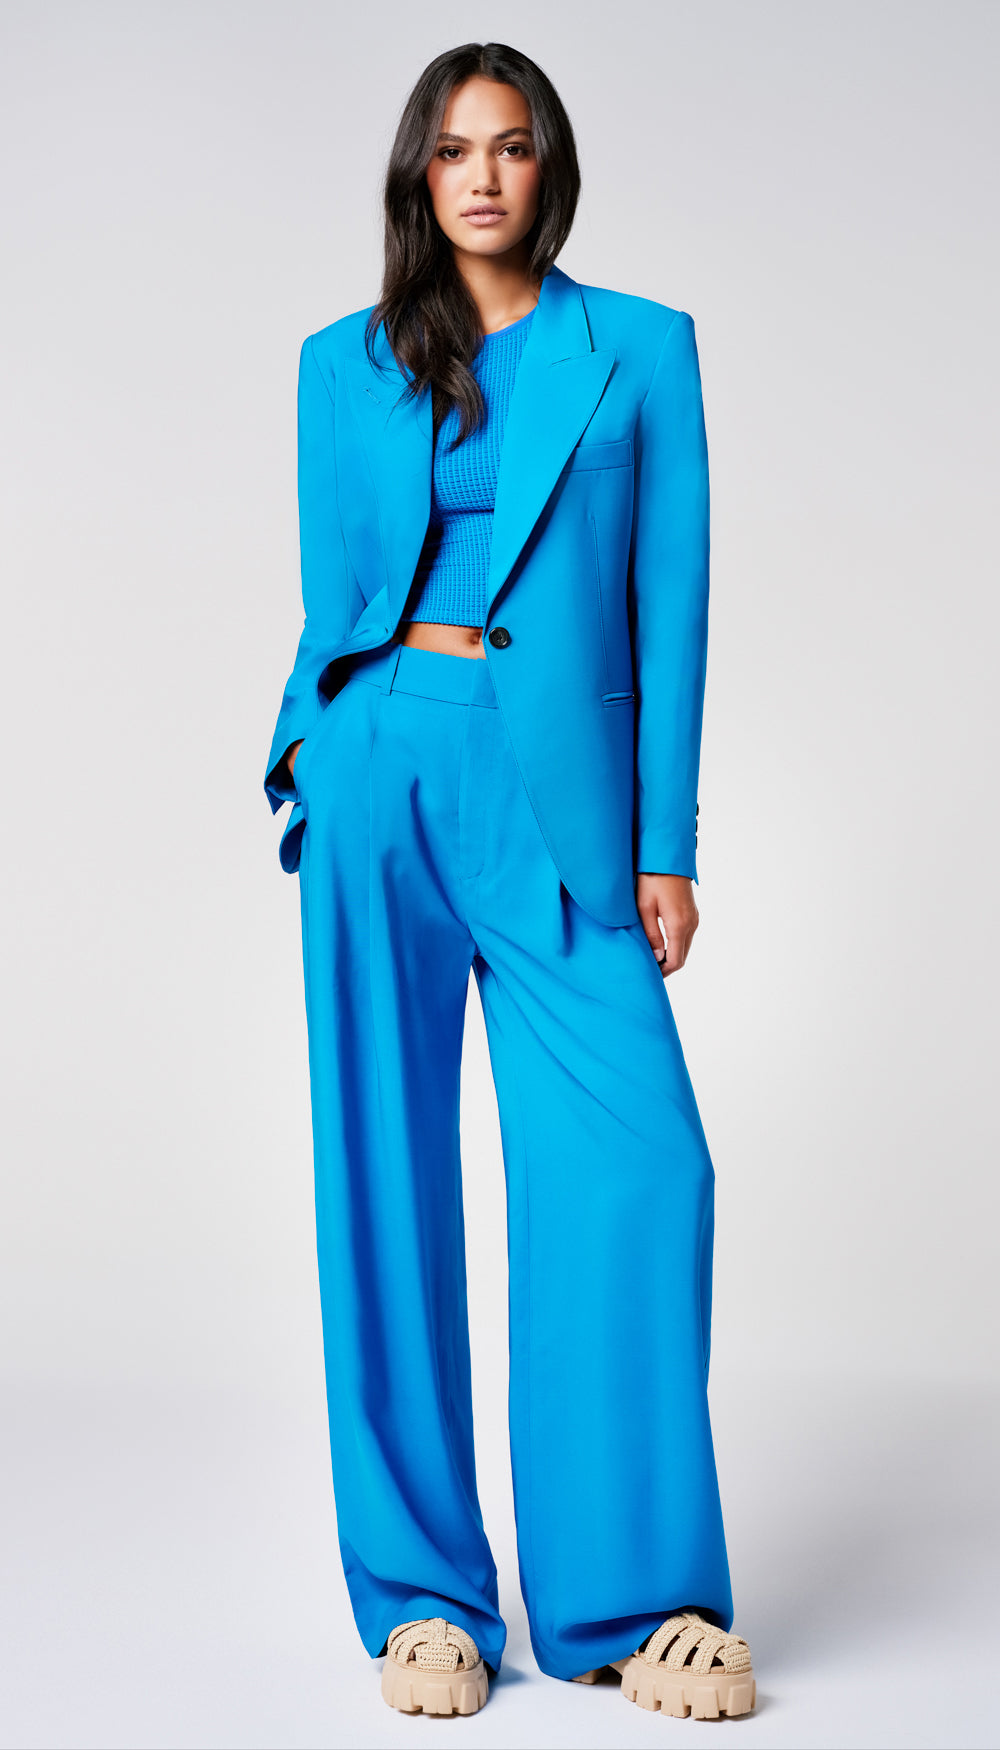 A woman in an oversized blue blazer and wide leg trousers.